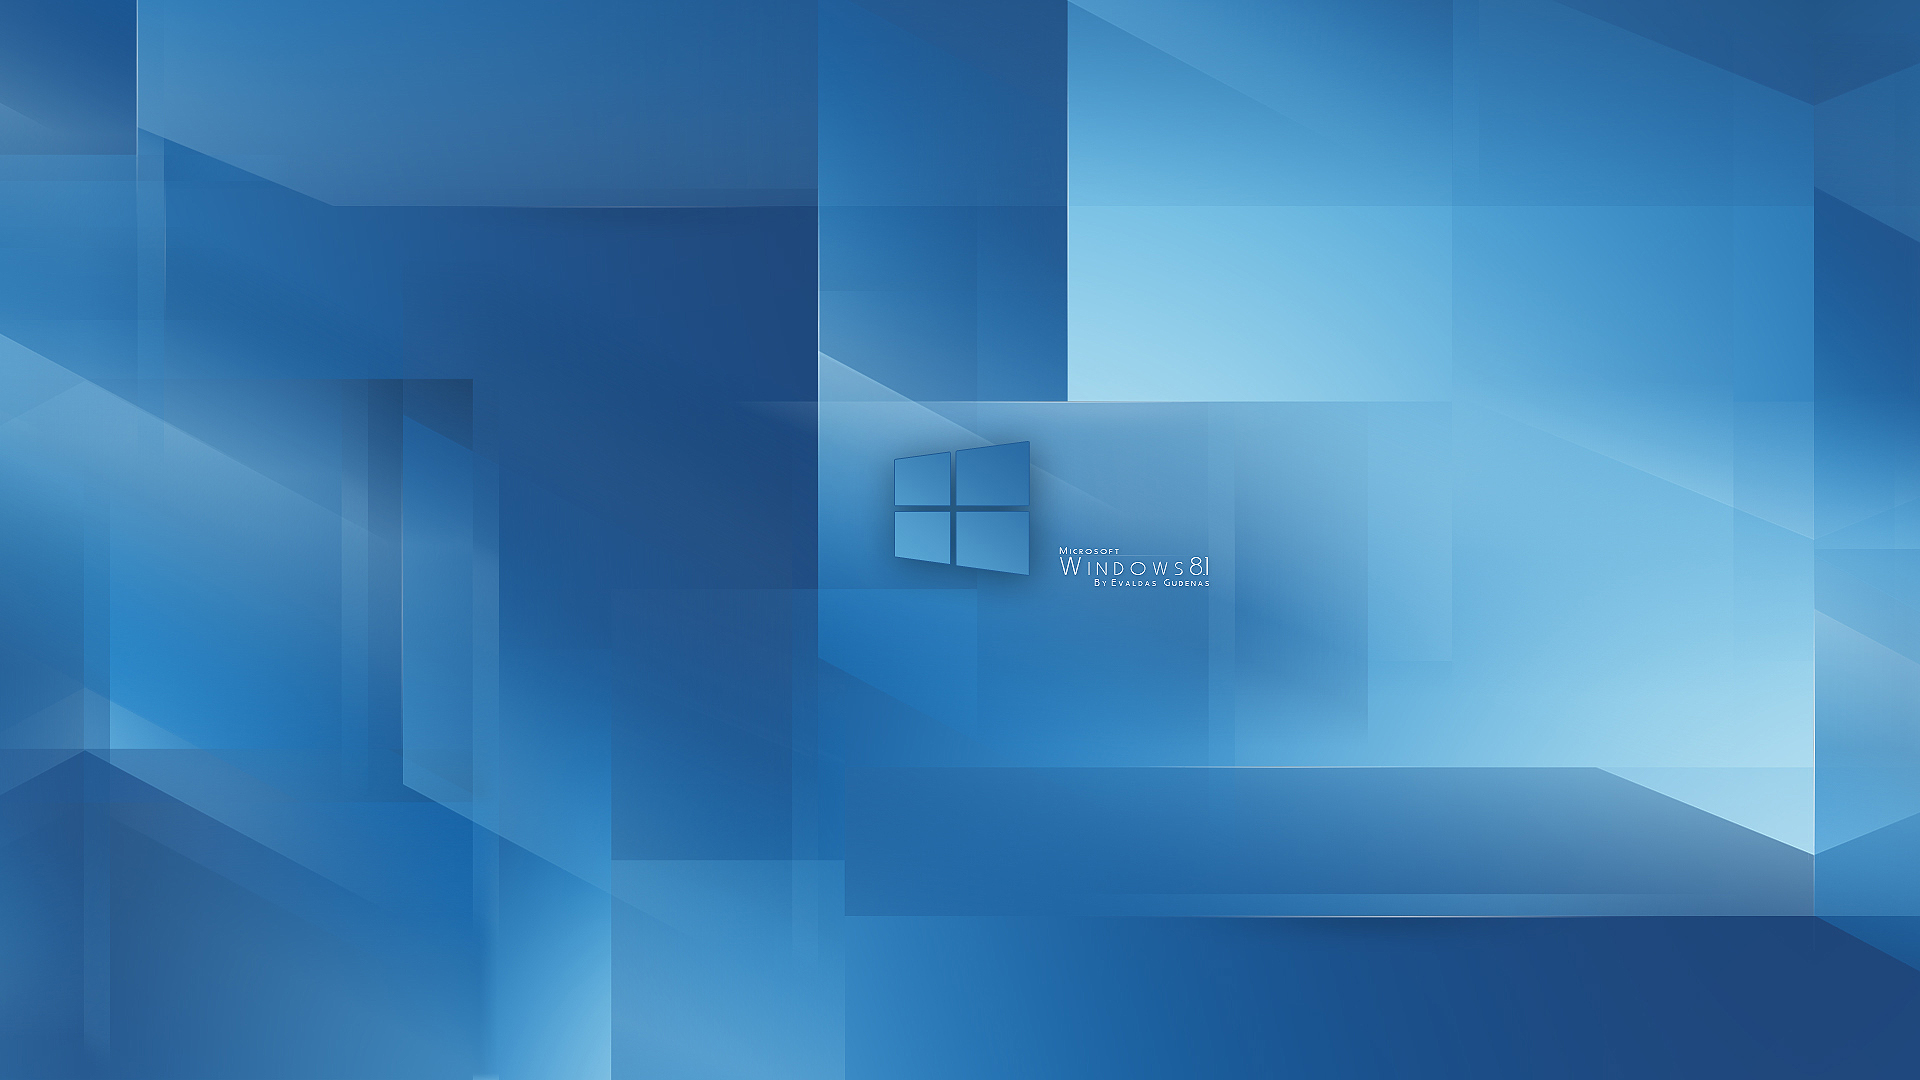 Wallpaper hd free download for windows 81